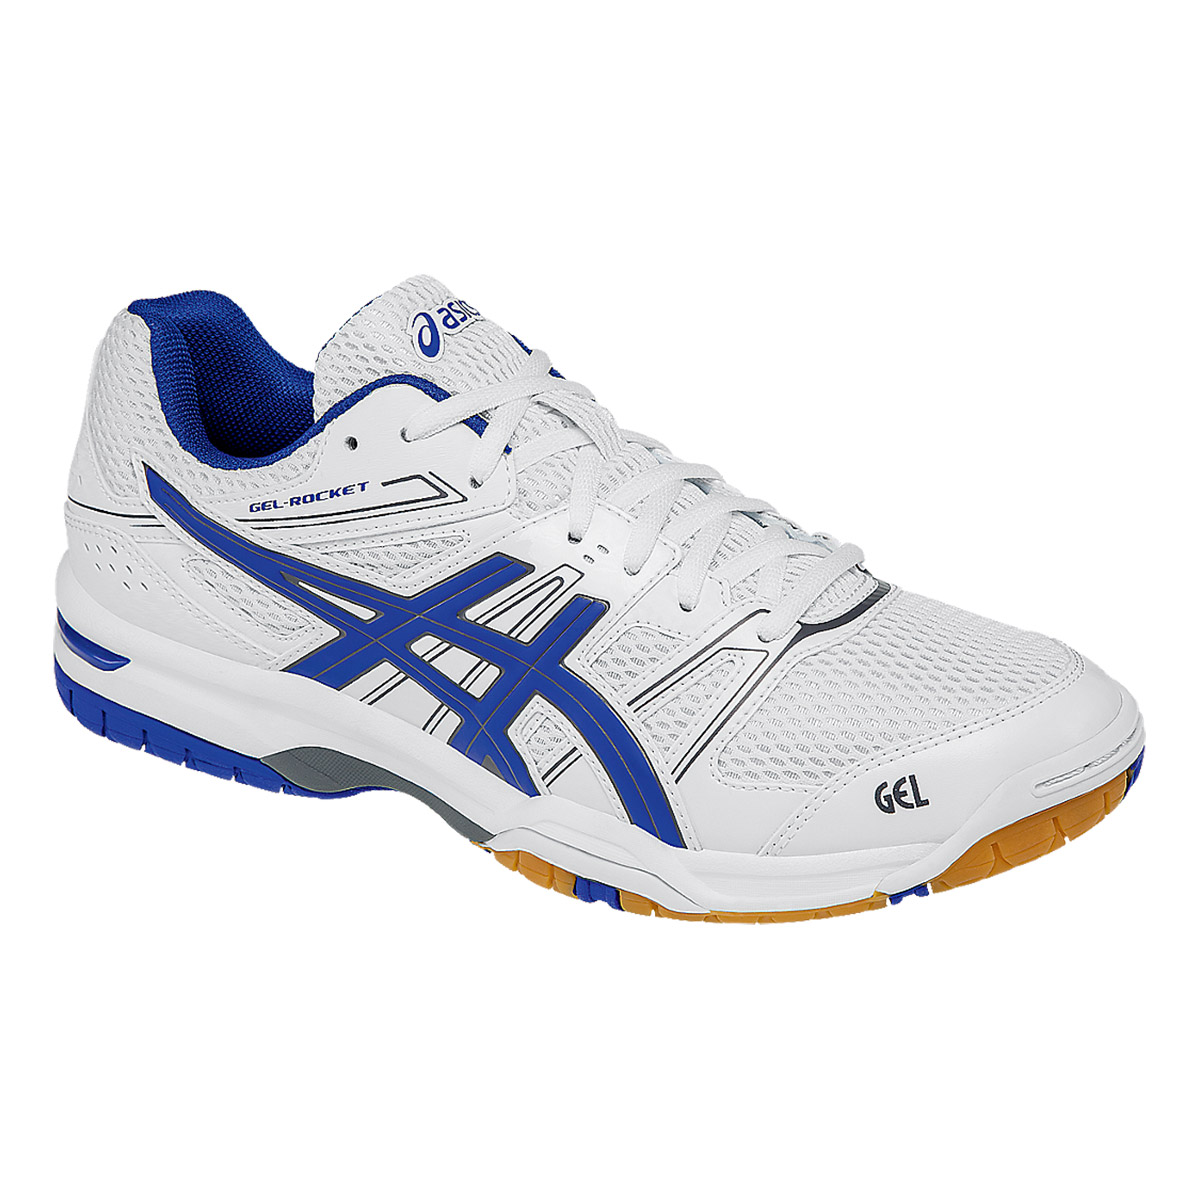 asics volleyball men's shoes india